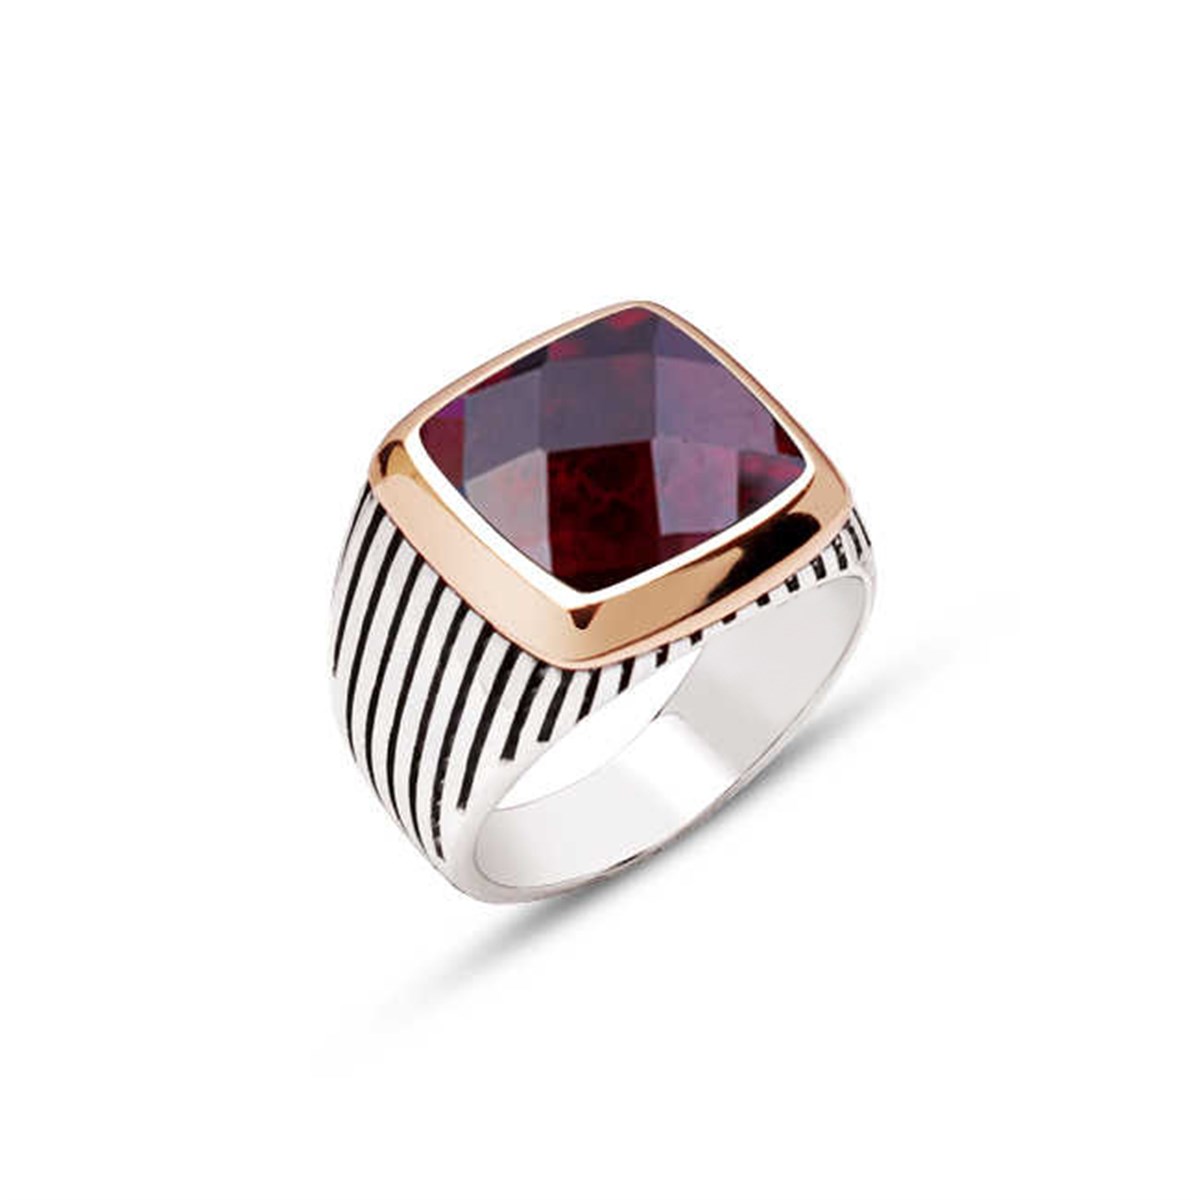 Sterling Silver Faceted Garnet Stone Lined Cased Men's Ring